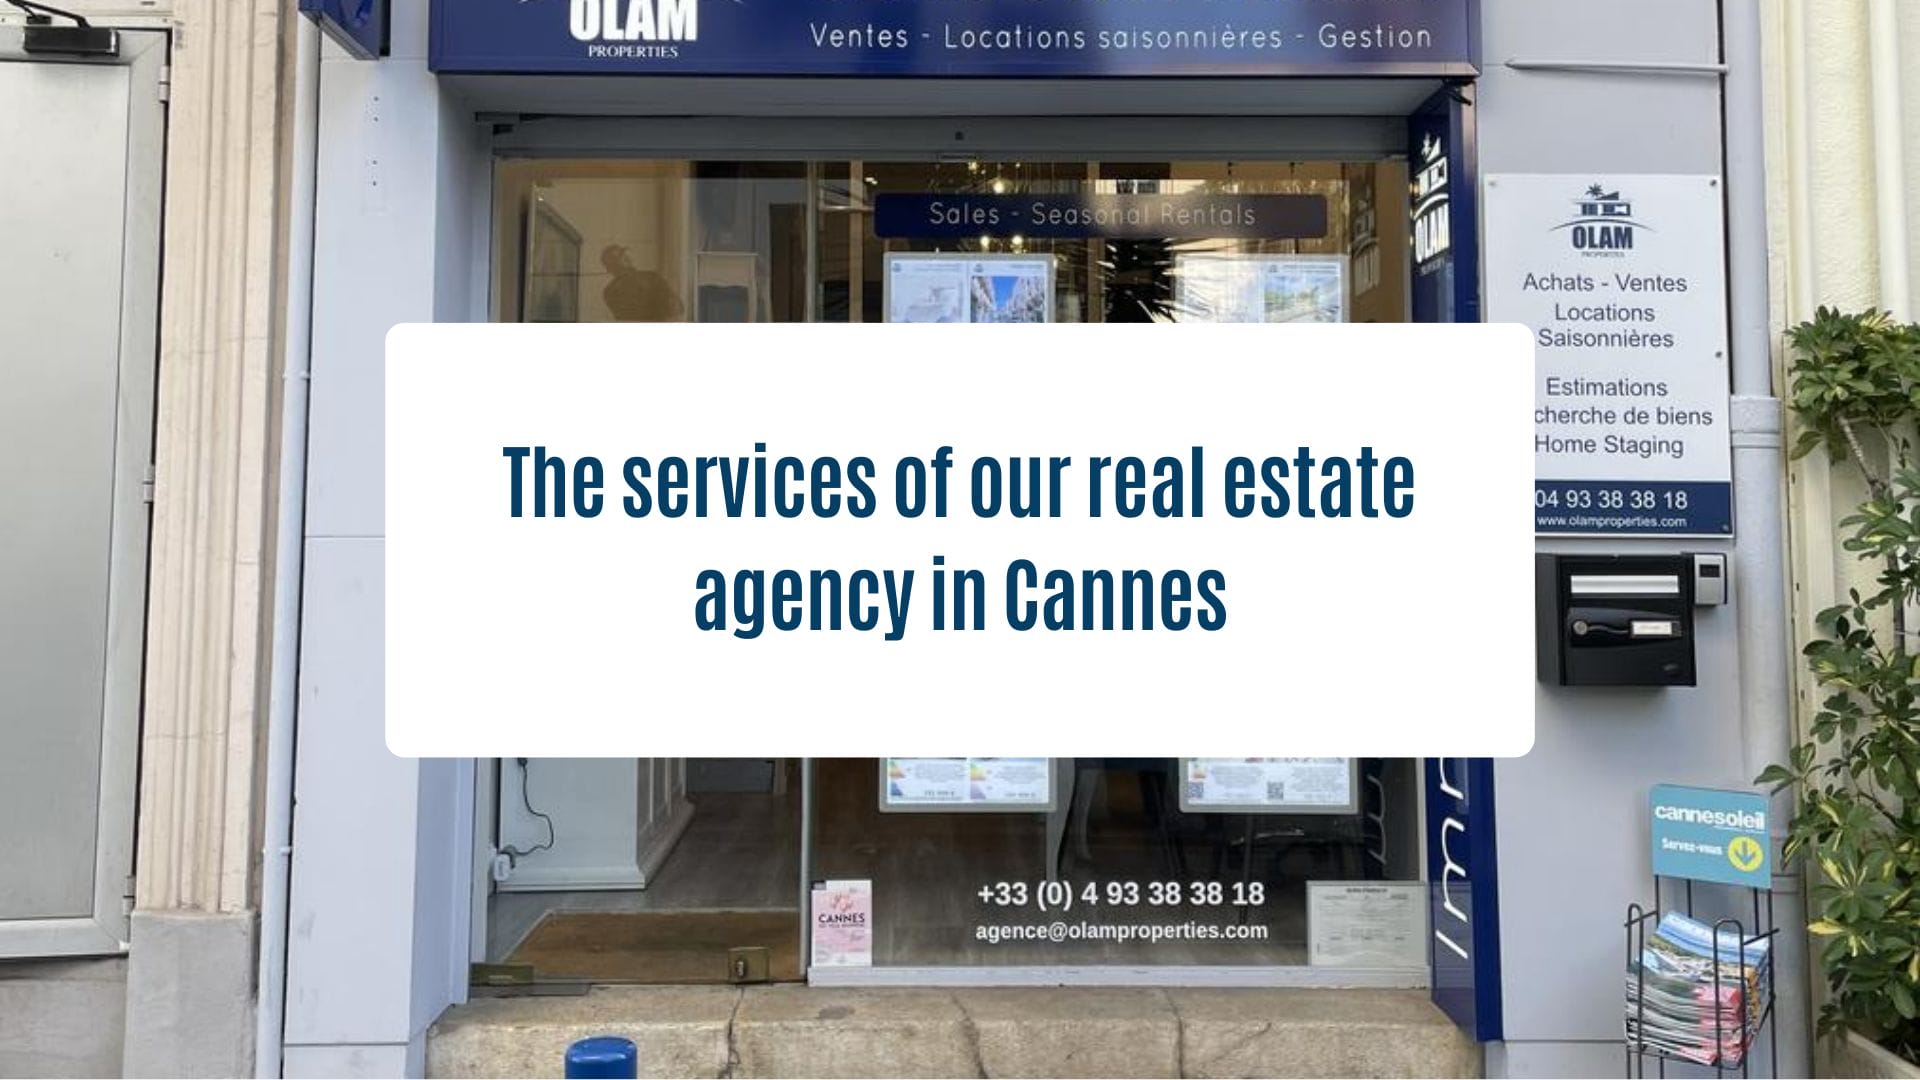 News Olam Properties - The services of our real estate agency in Cannes